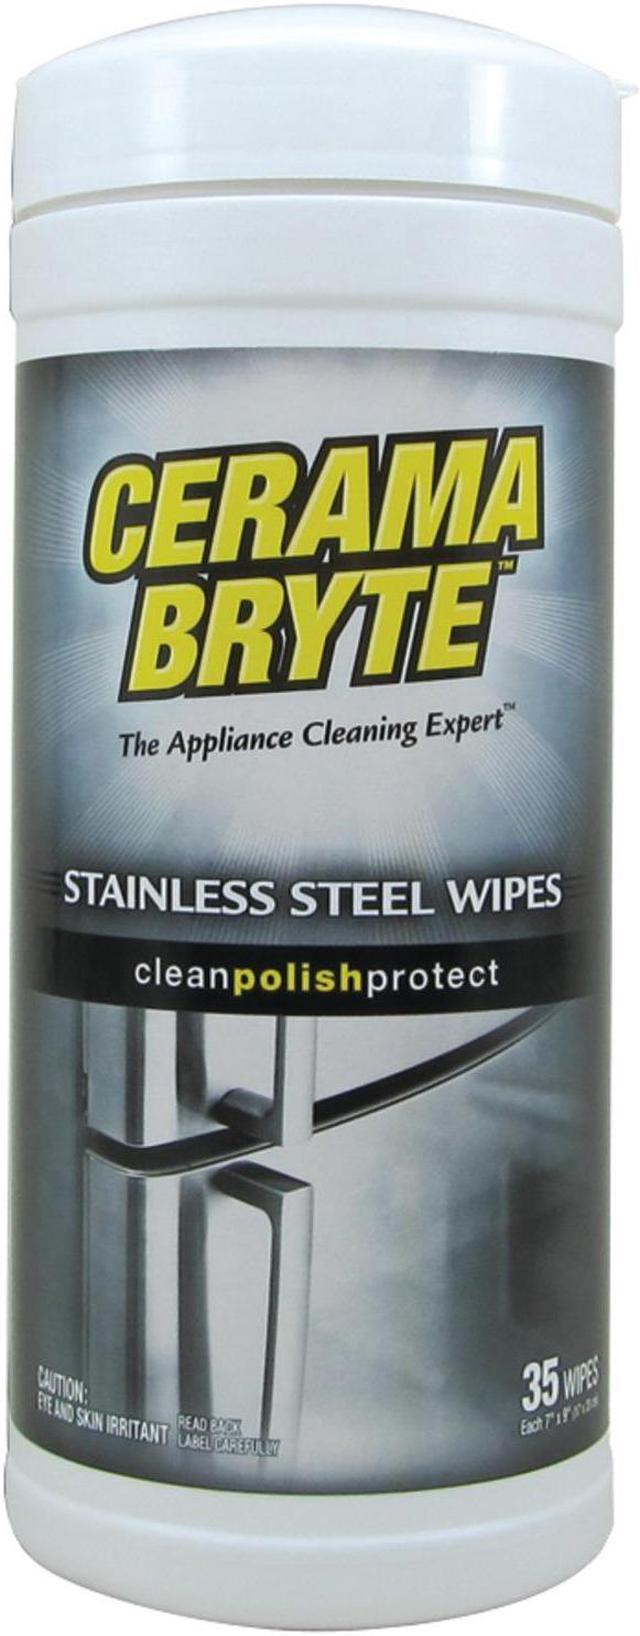 Cerama bryte 48635 Stainless Steel Cleaning Wipes